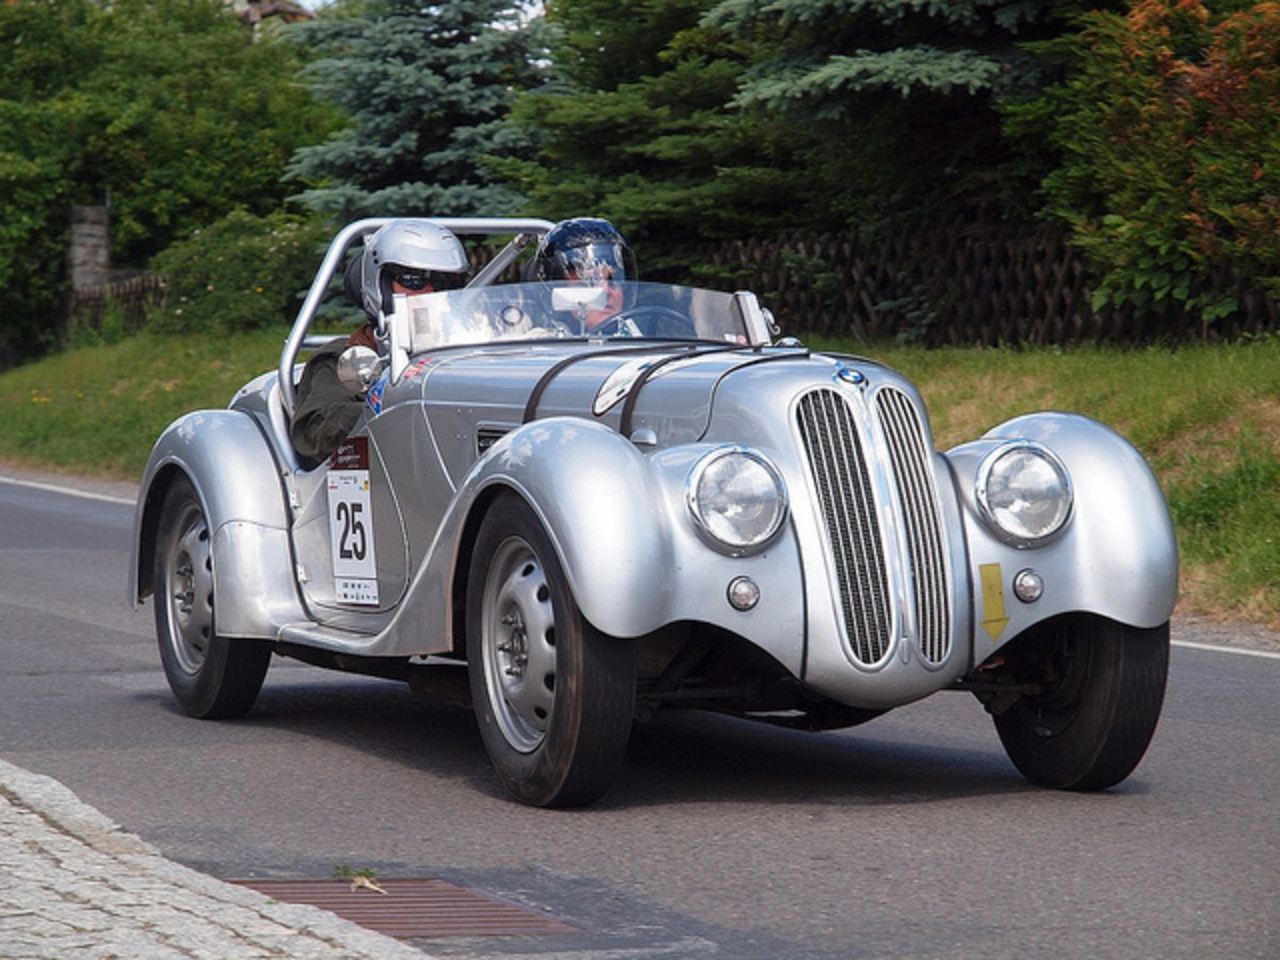 BMW 328 Roadster | Flickr - Photo Sharing!